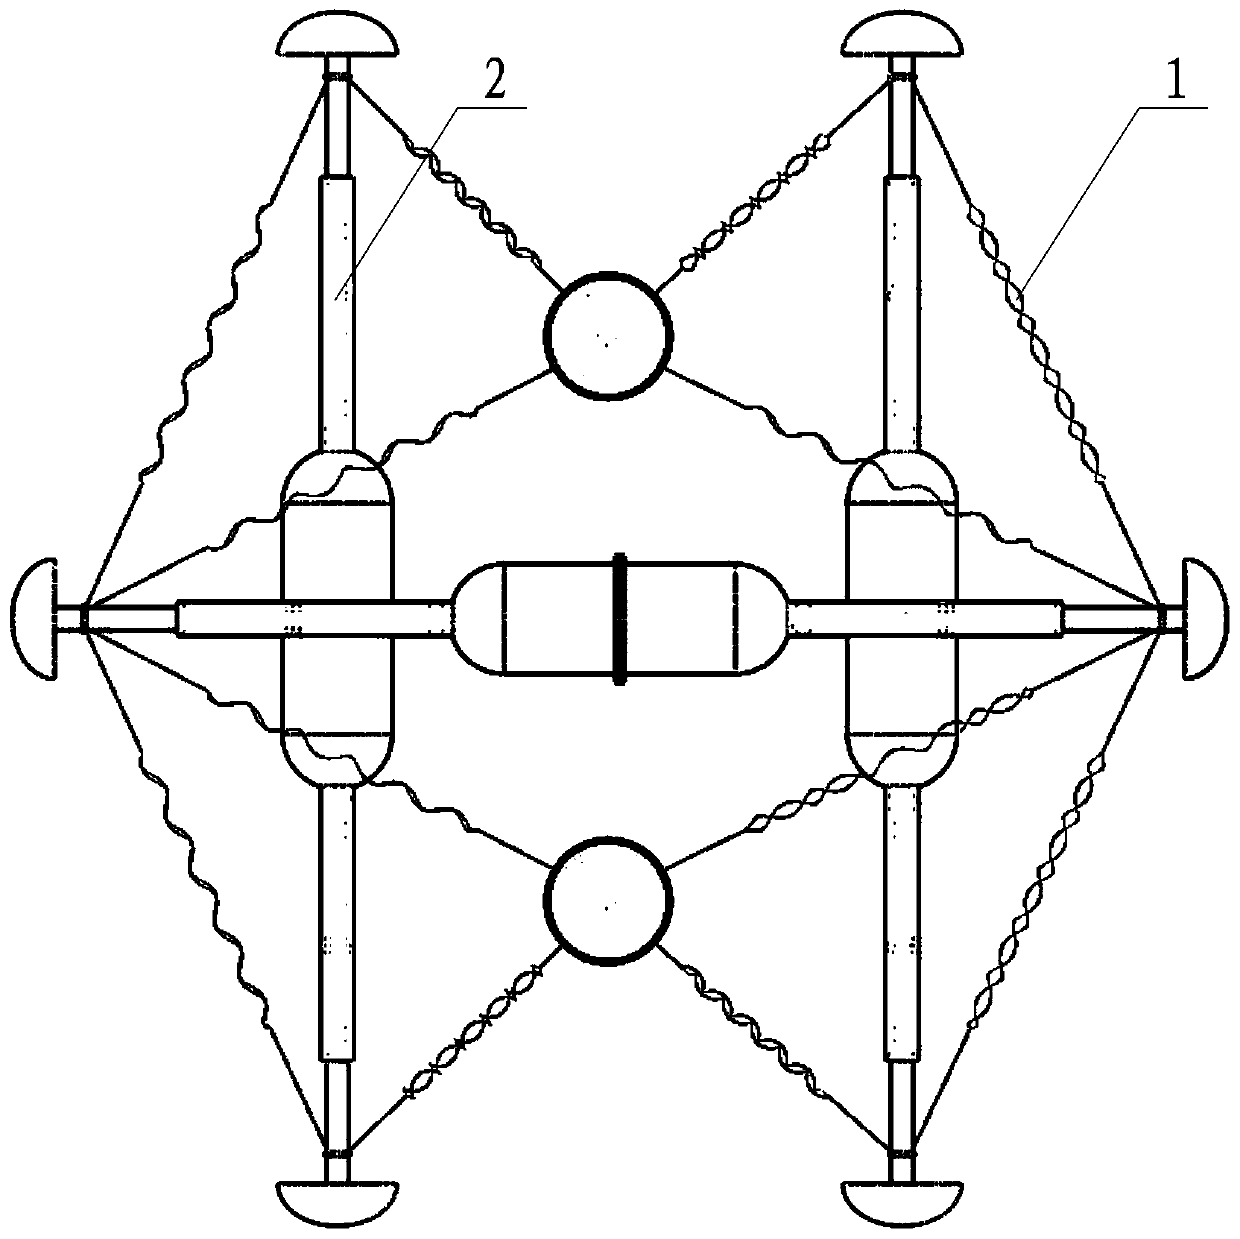 Modularized robot based on tensioned integral structure